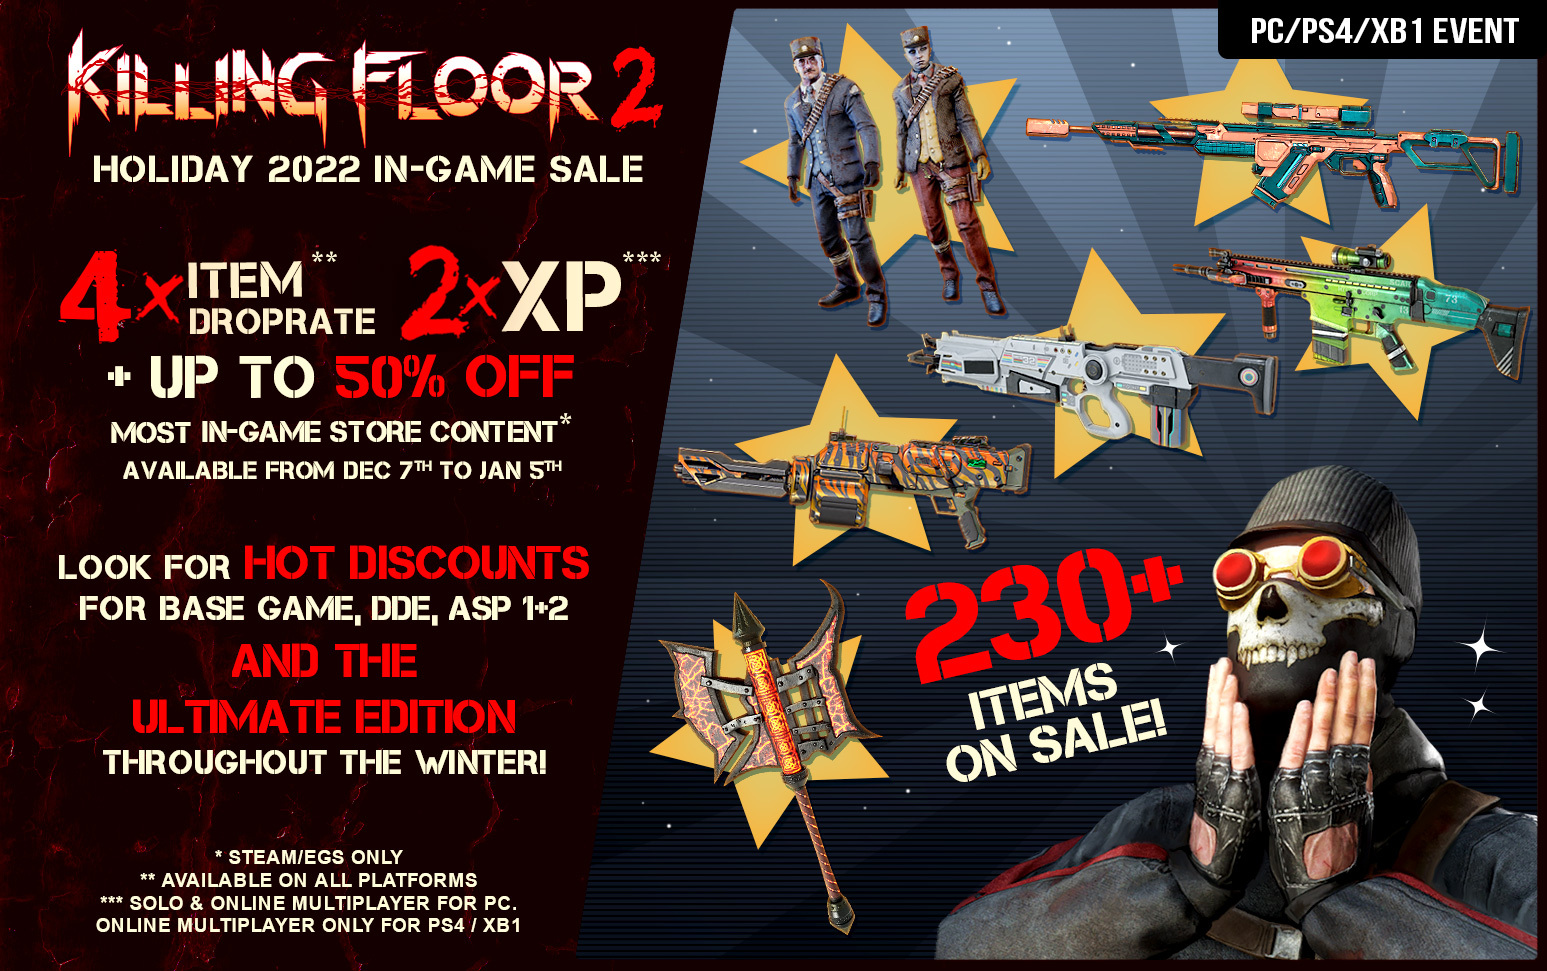 Killing Floor 2: The Double XP, Quadruple drops, and in game sale is live!